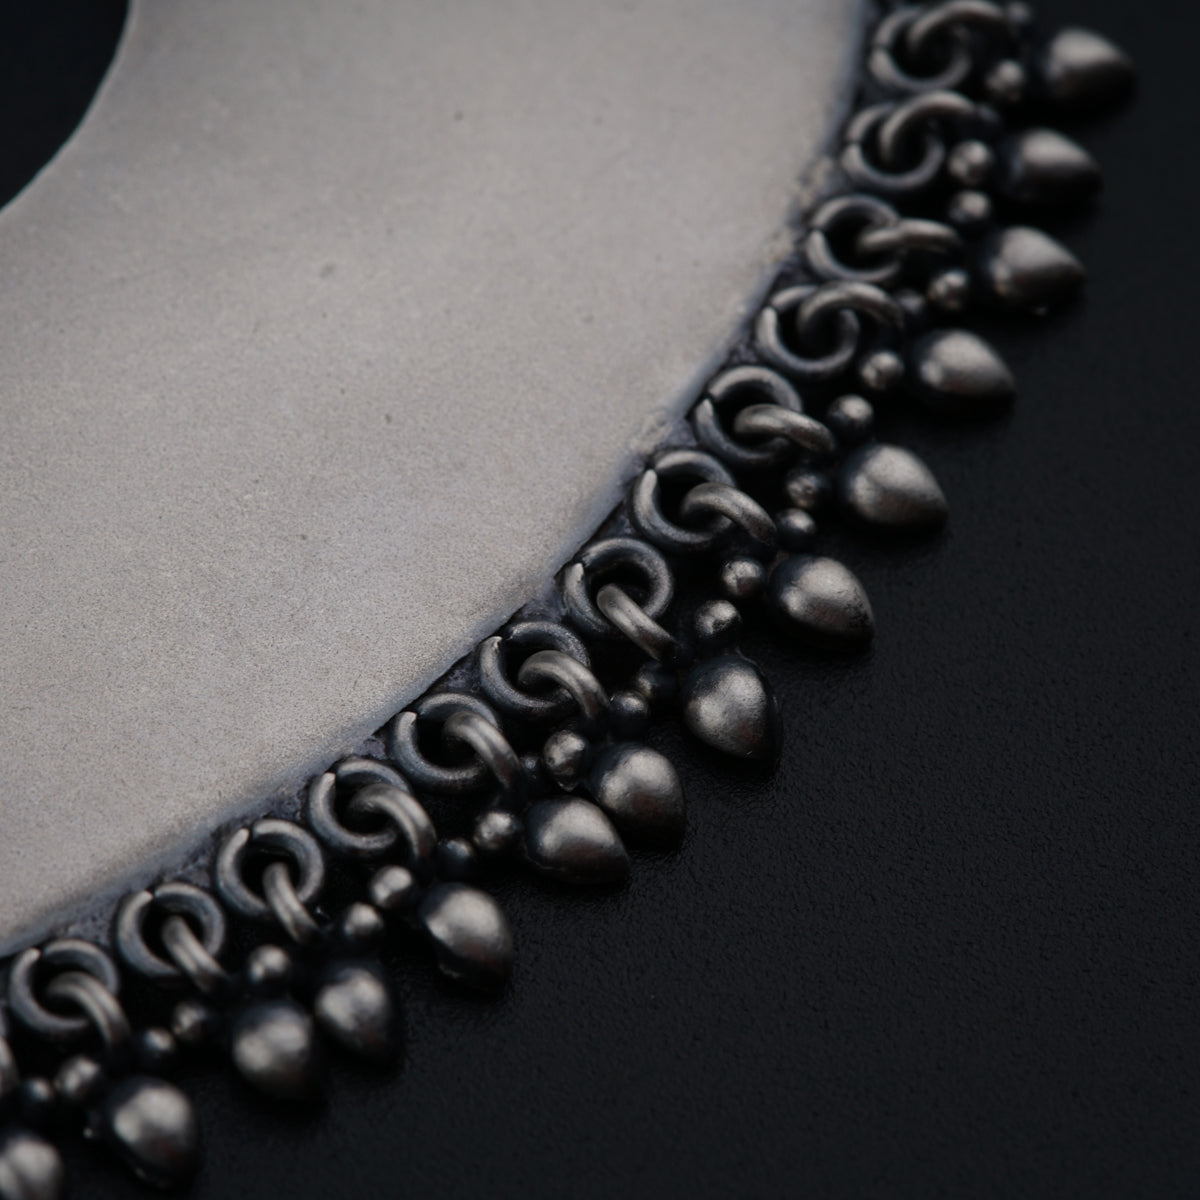 a close up of a black and silver object